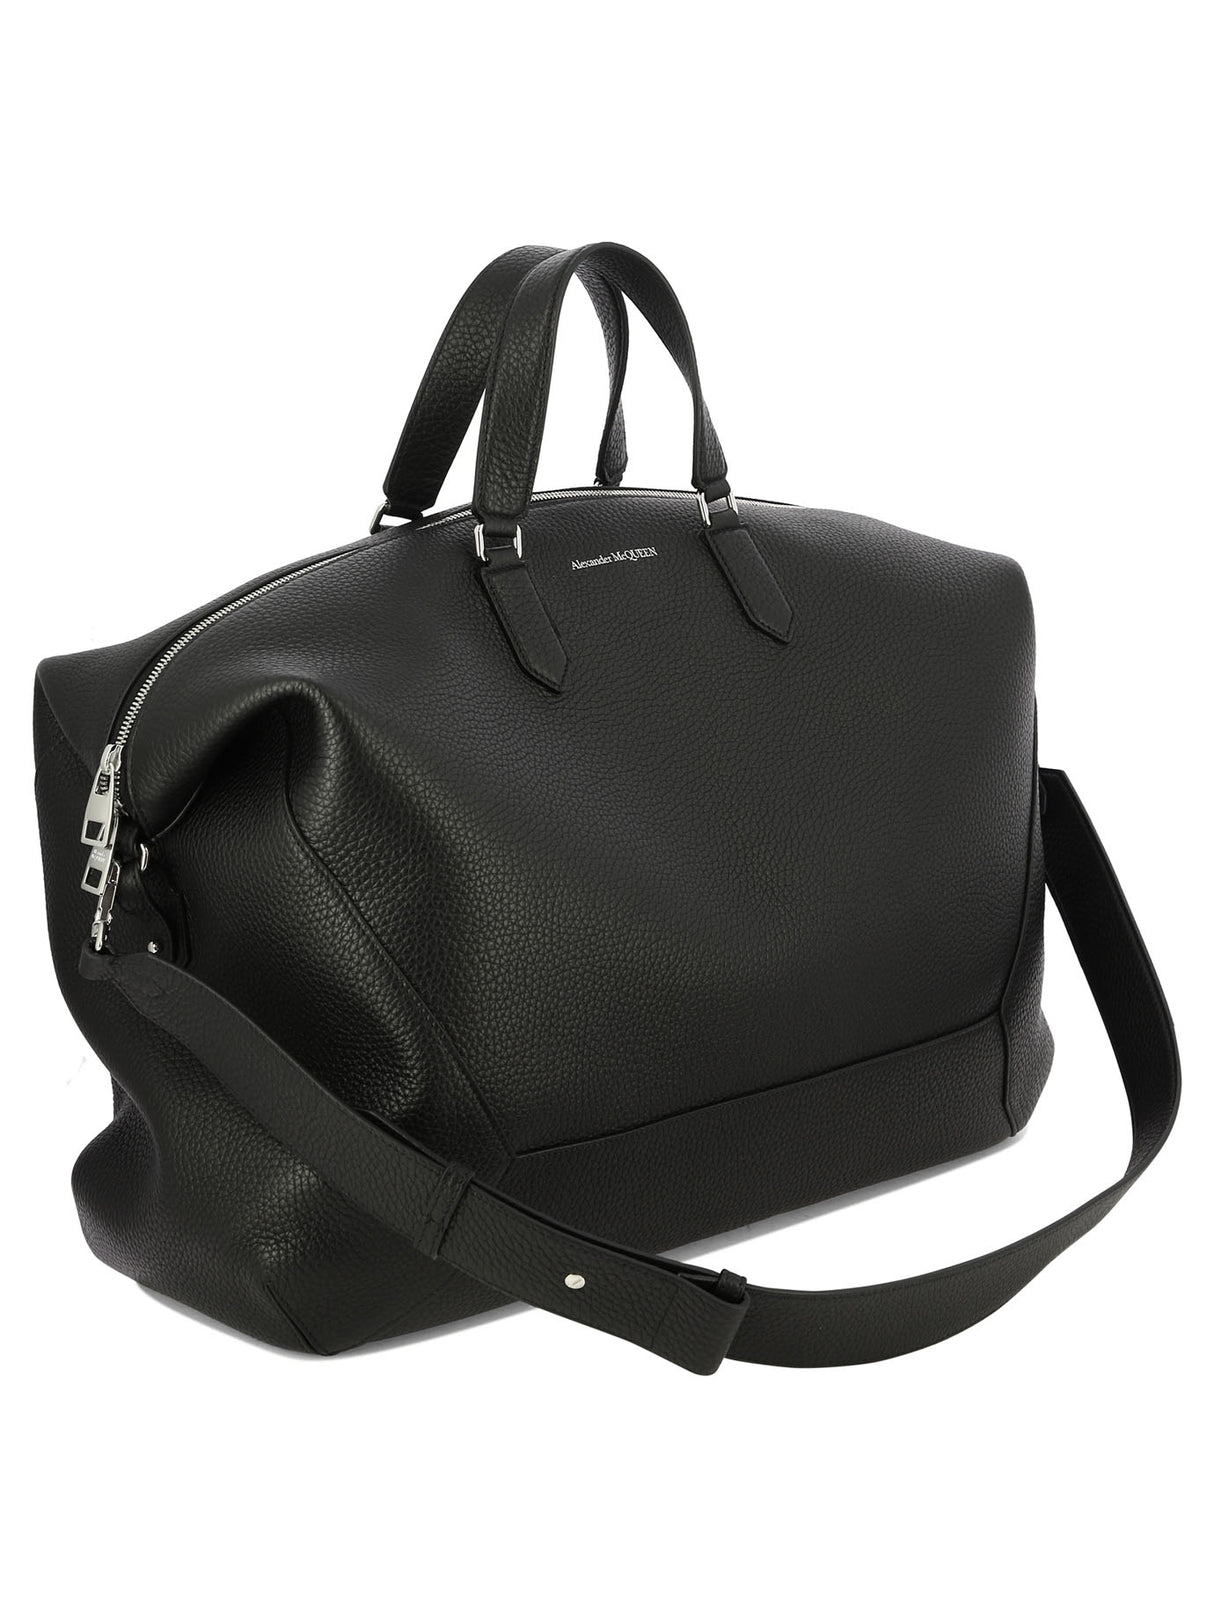 ALEXANDER MCQUEEN Black Leather Backpack for Men - FW23 Collection